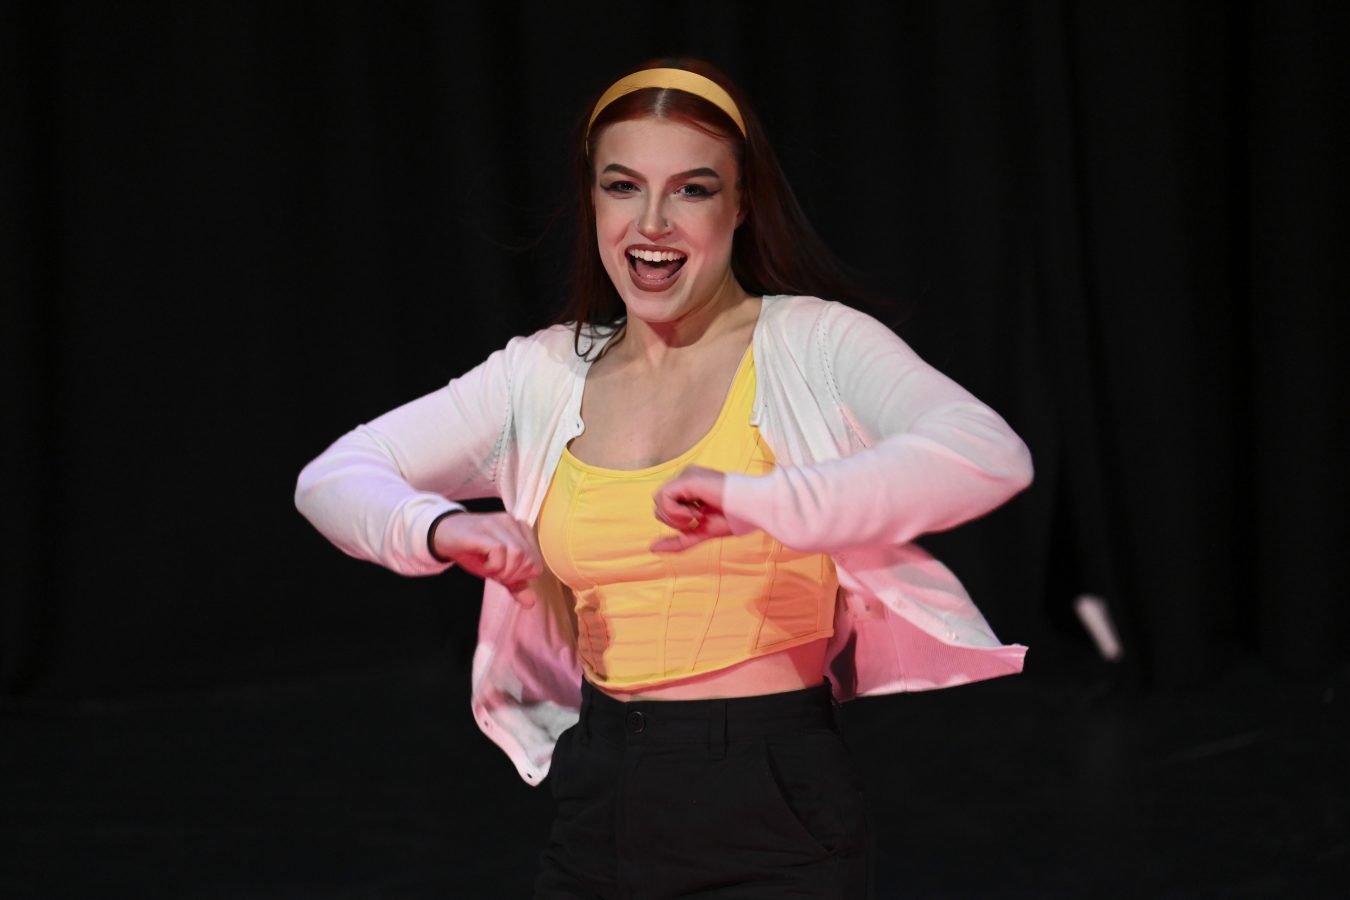 girl in yellow singlet, black pants and white cardigan dancing on stage.